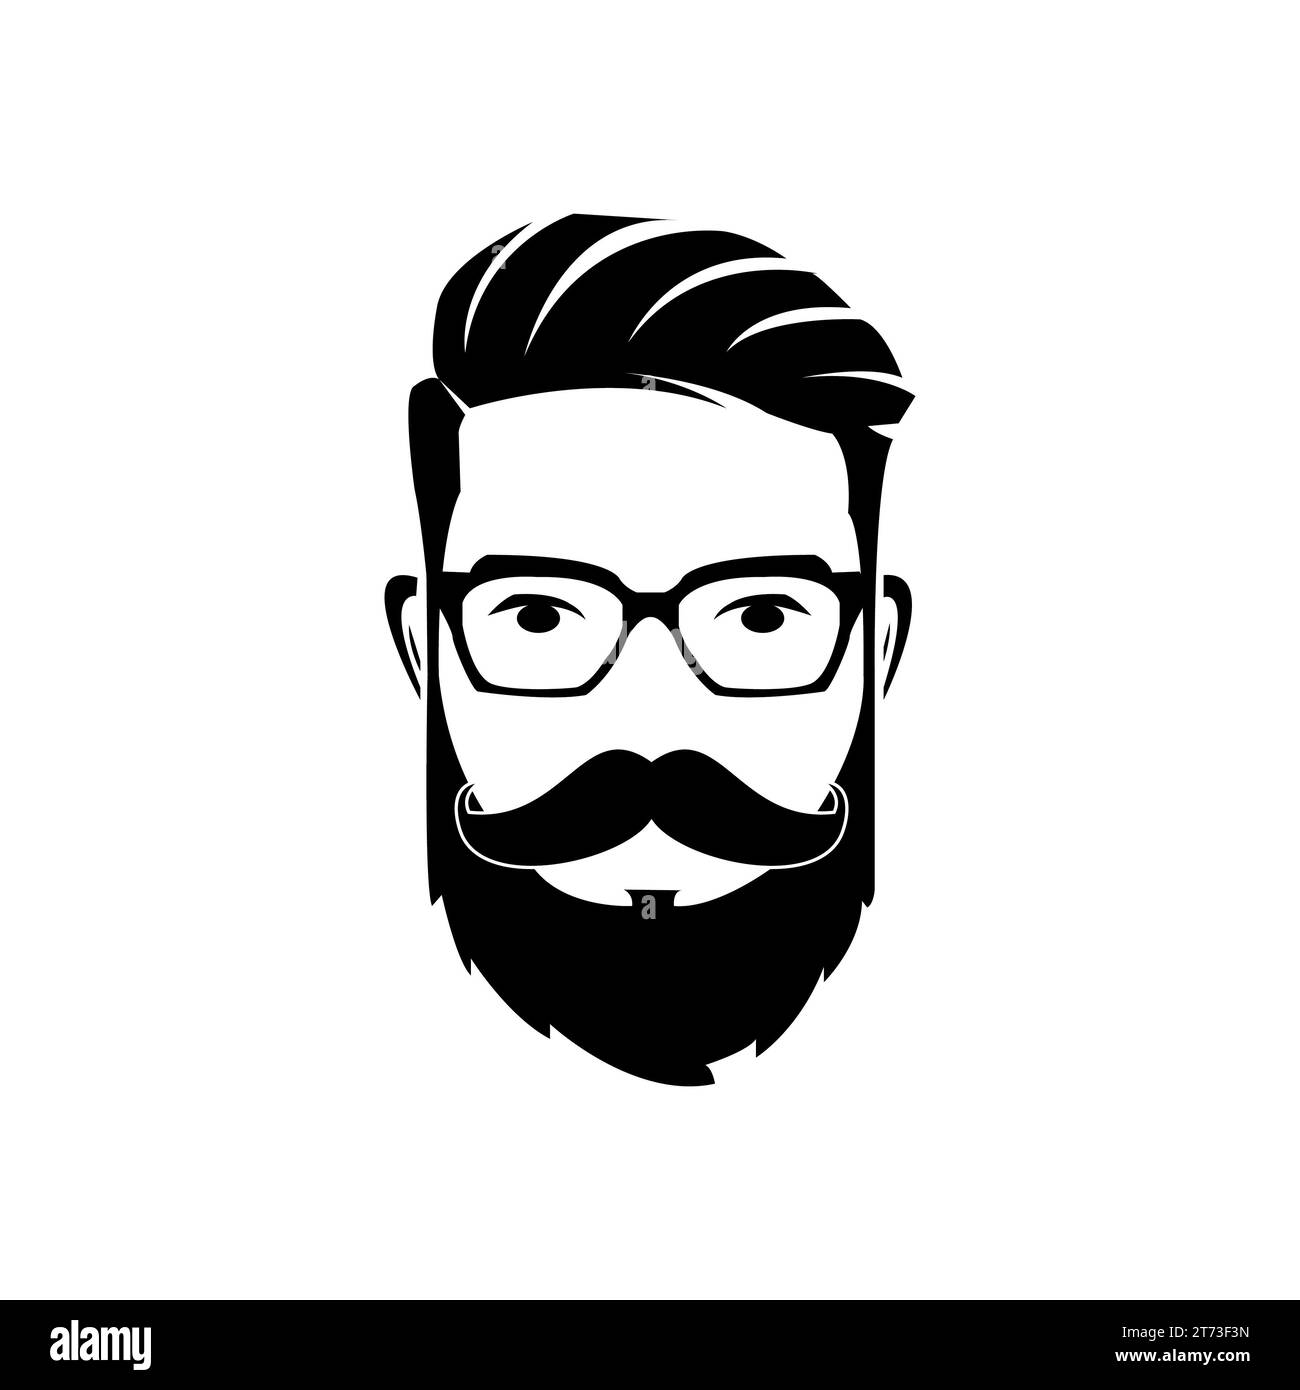 Bearded men face, hipster character. Man's Face With Beard. Black And White Vector Object. Stock Photo